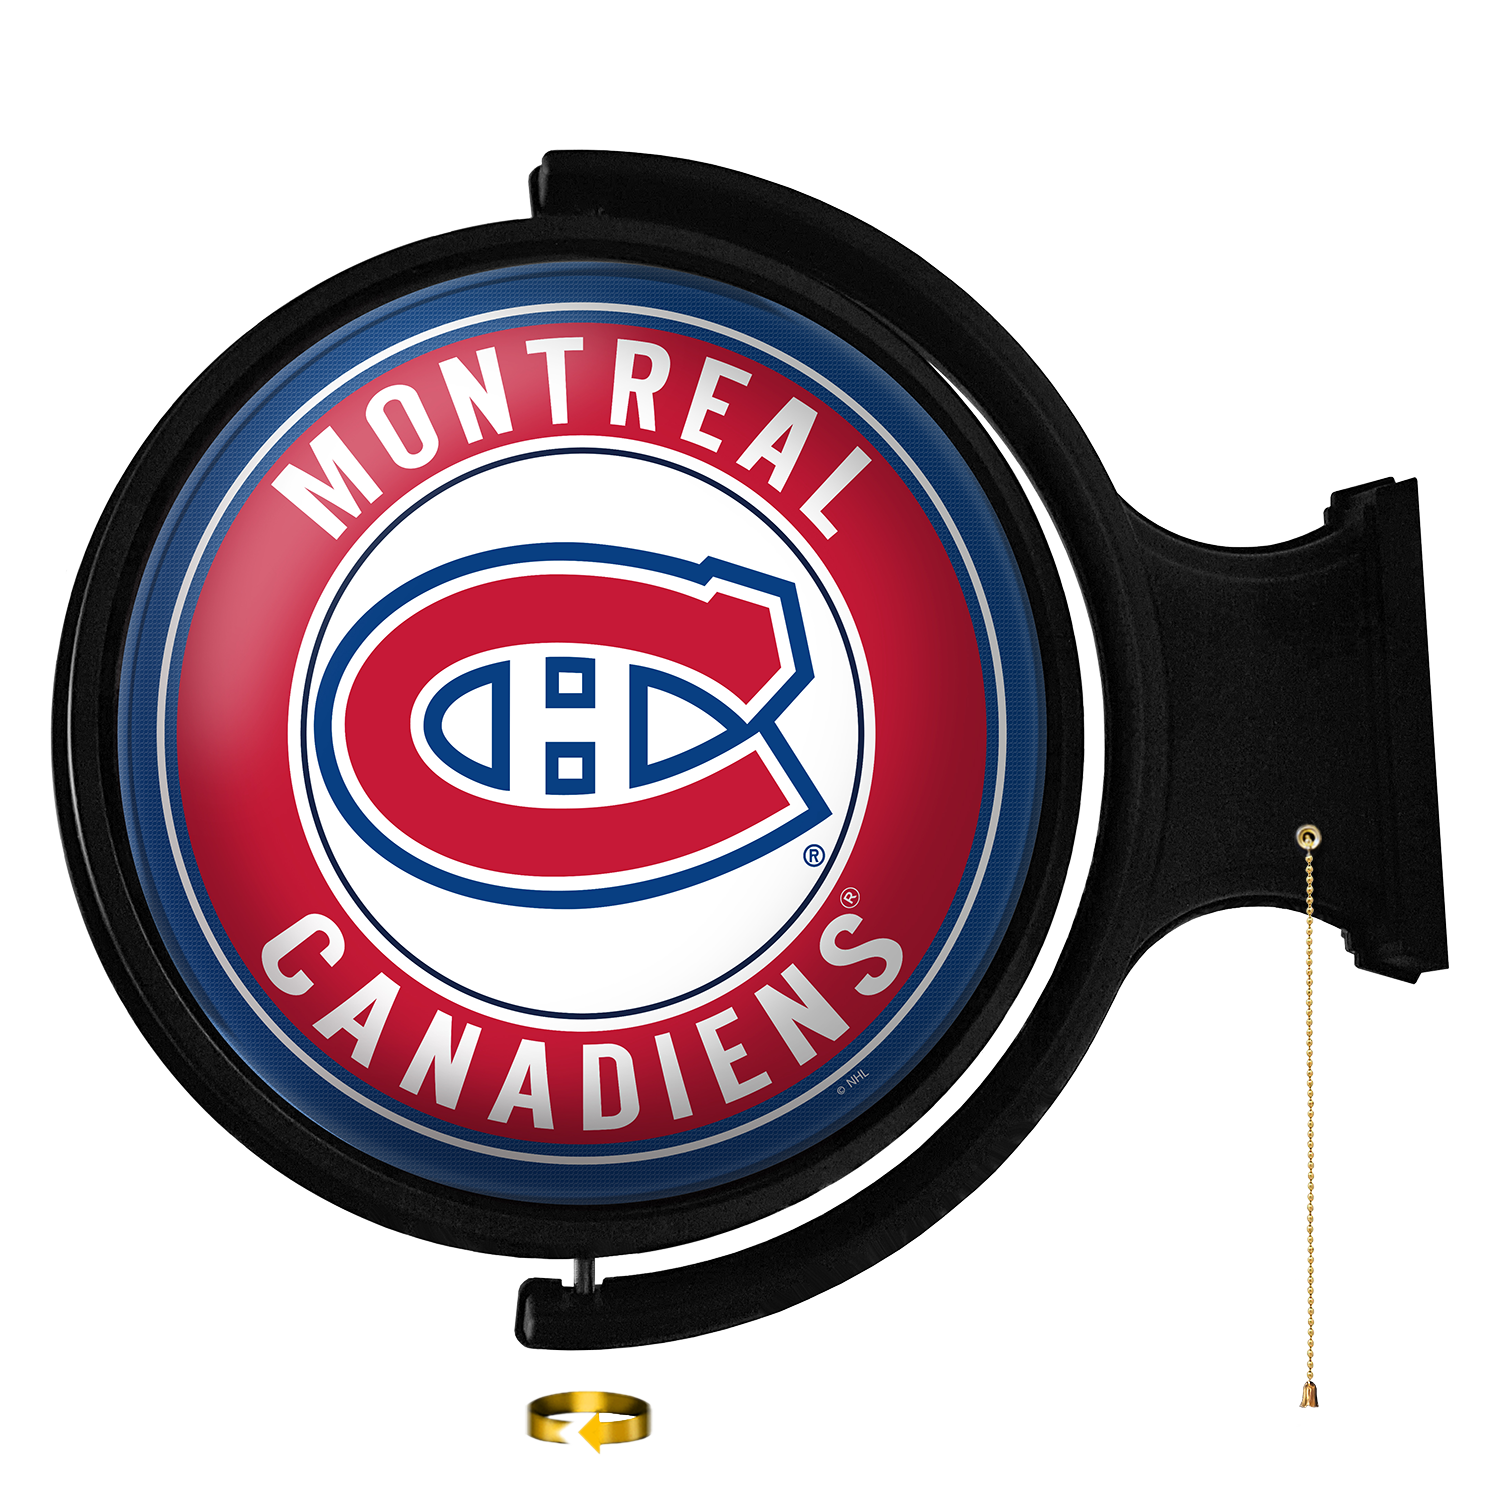 Montreal Canadiens Round Rotating Wall Sign